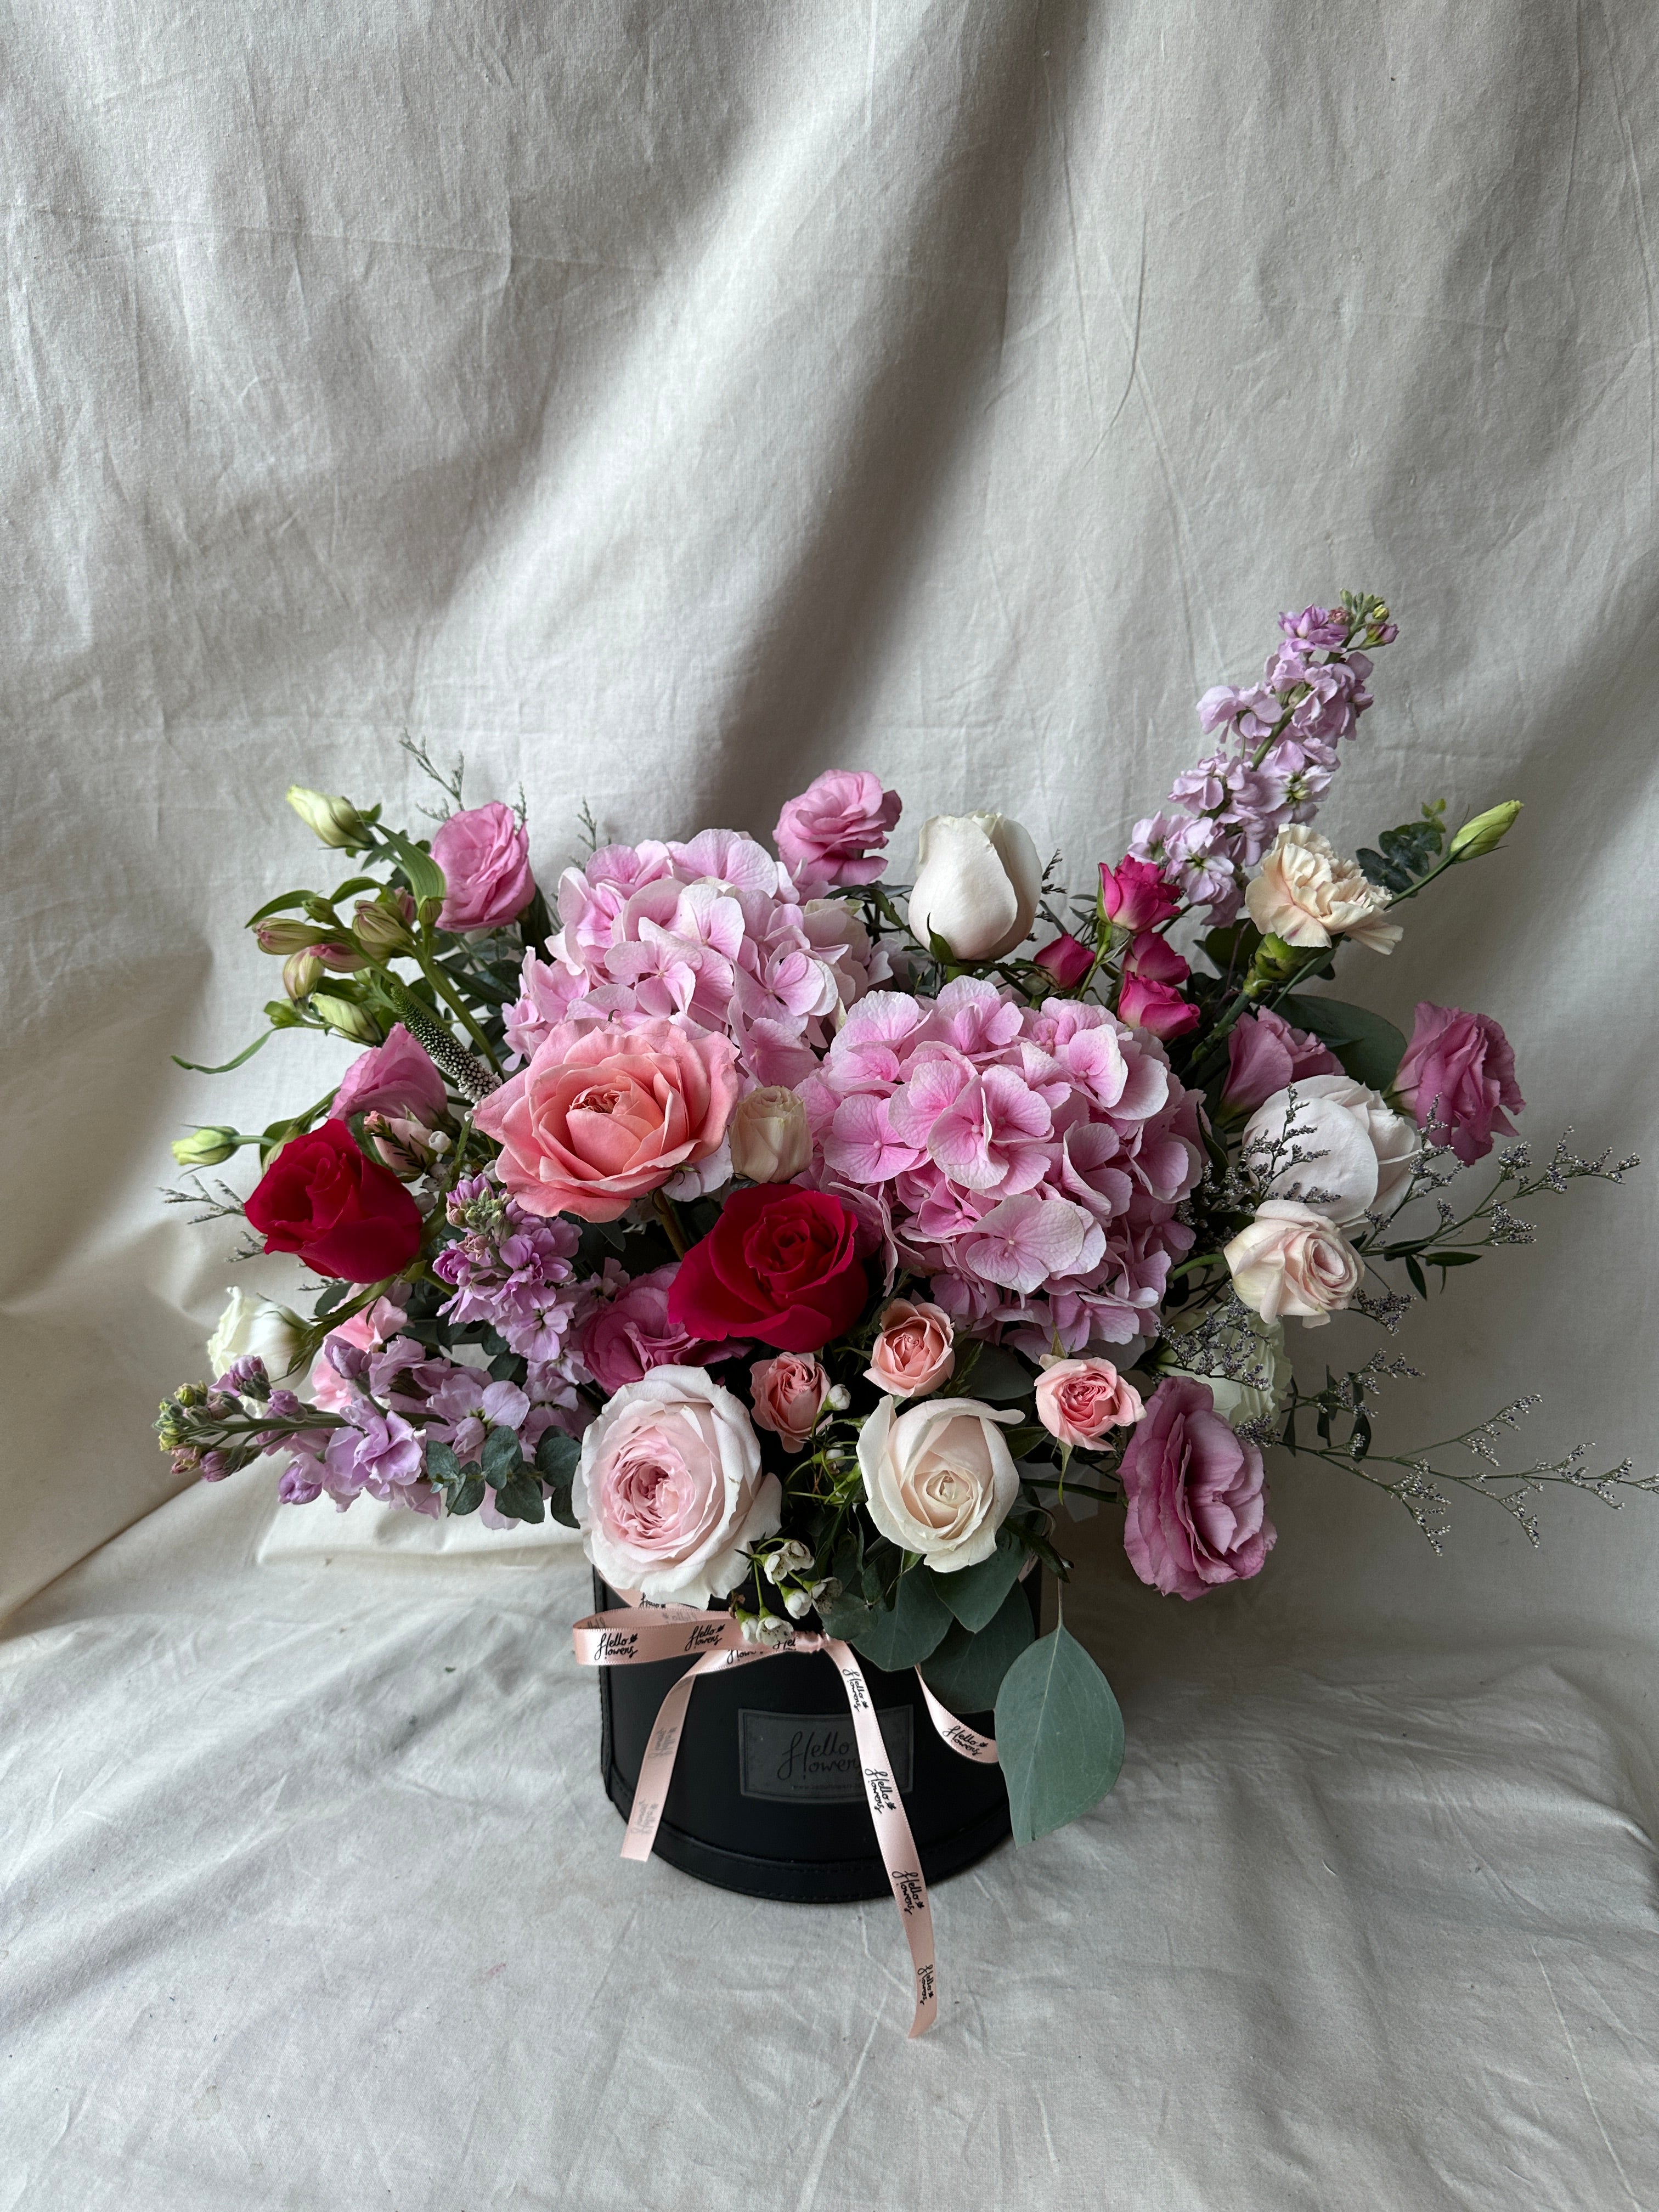 10 Stunning Birthday Flowers to Brighten Up Your Loved One's Day